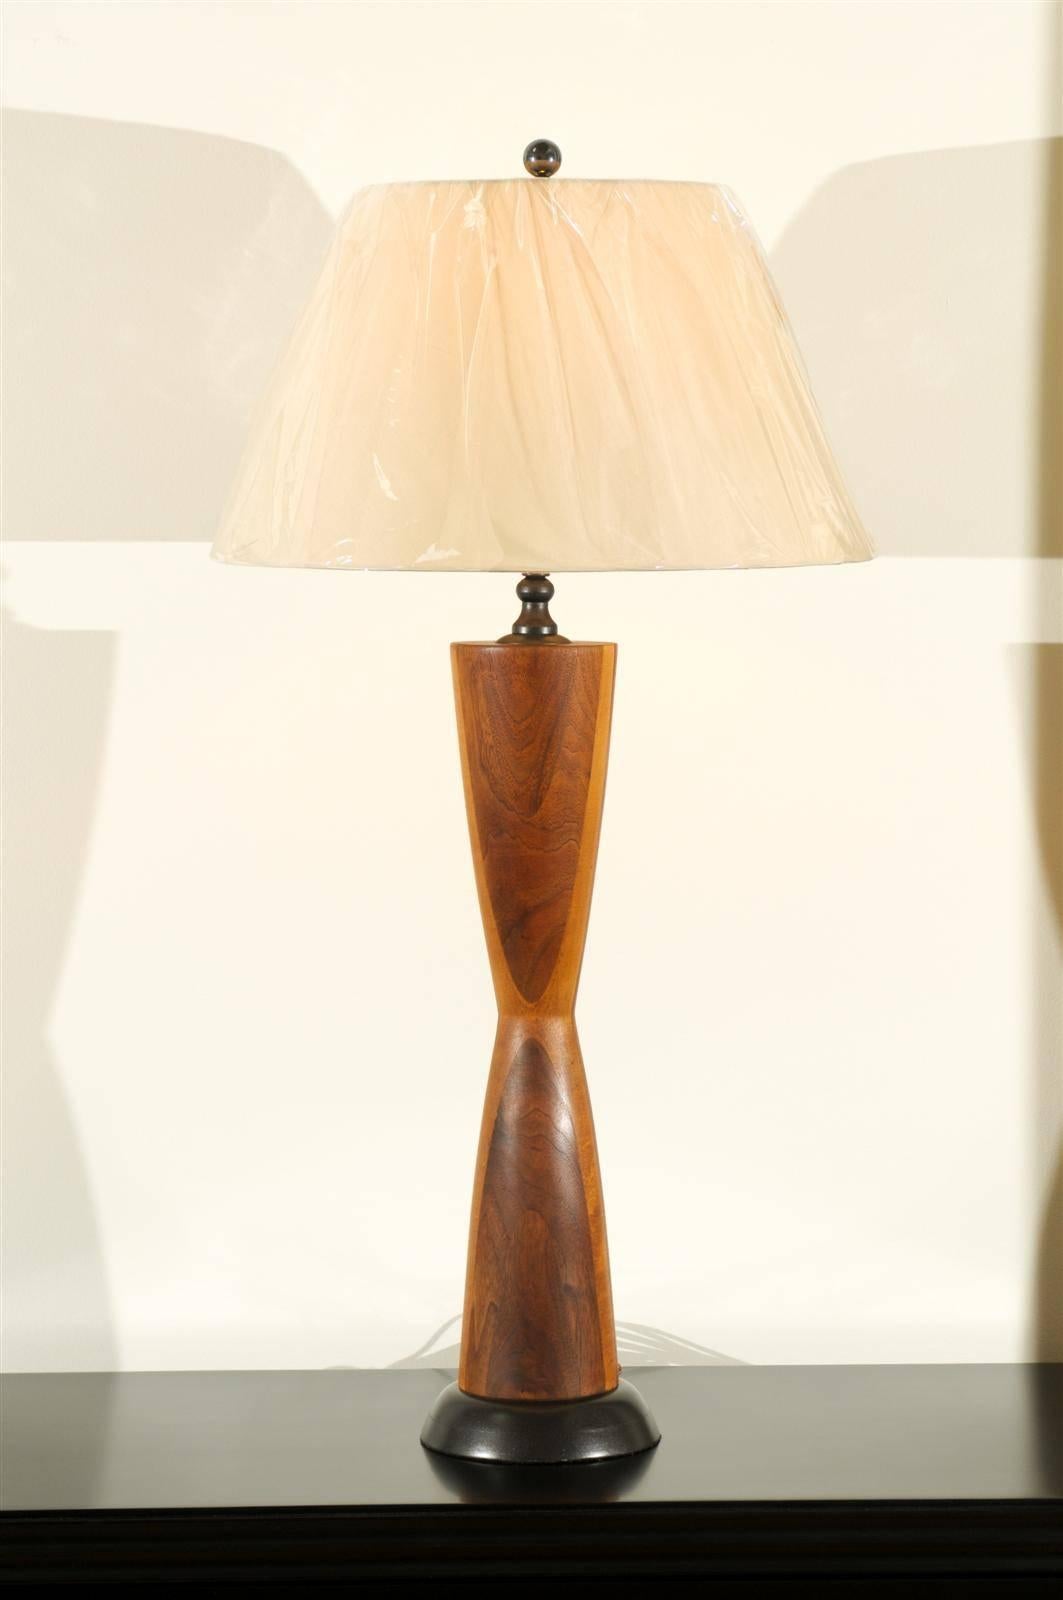 An exceptional pair of vintage hand made Walnut lamps, circa 1950's.  Hourglass shape with beautiful scale and detail. The color and movement evident in the Walnut is absolutely stunning.  Simply Breathtaking !  While the pieces are unmarked, they